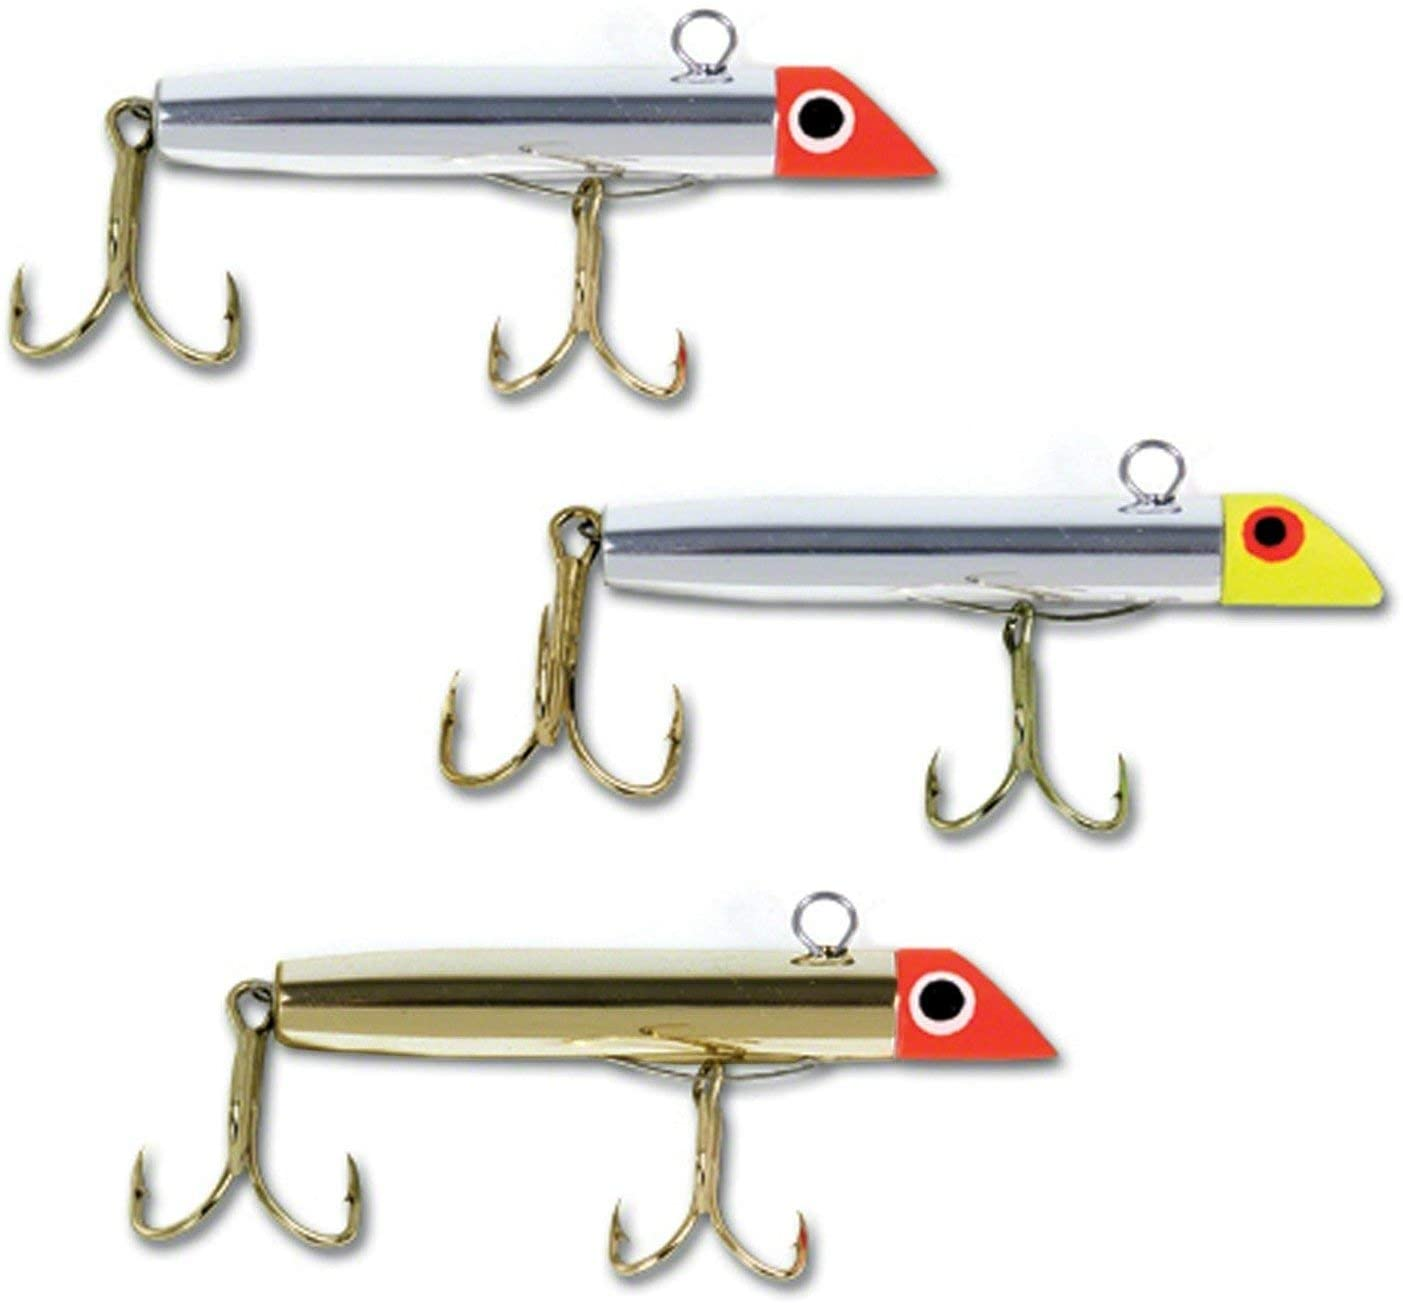 Spanish Mackerel Lure - Page 2 - The Hull Truth - Boating and